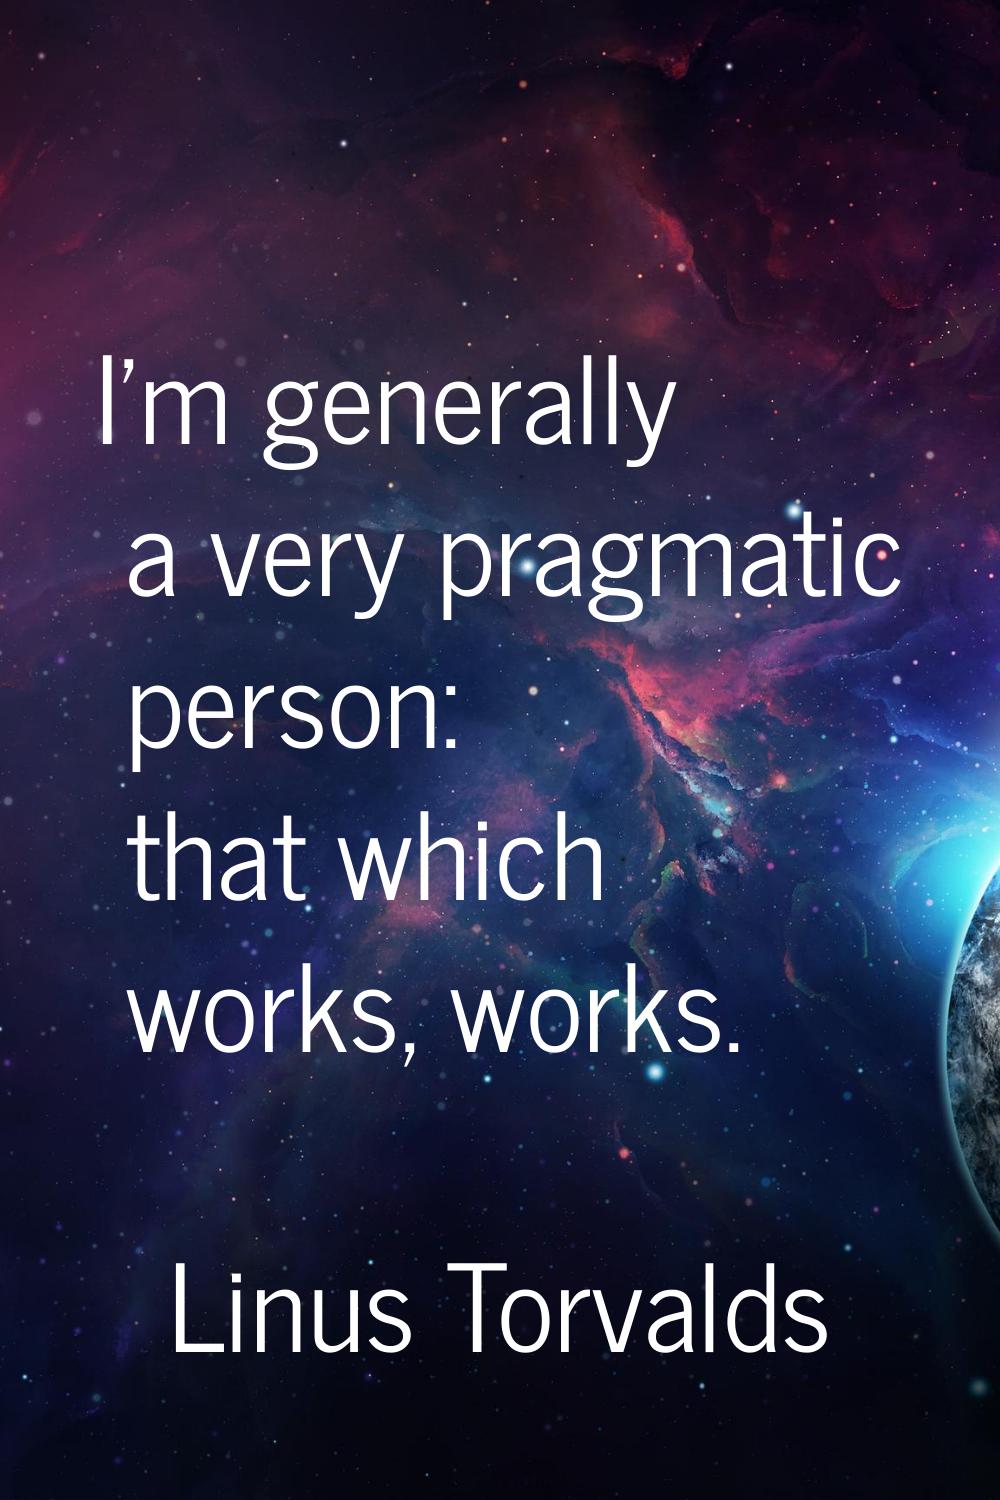 I'm generally a very pragmatic person: that which works, works.